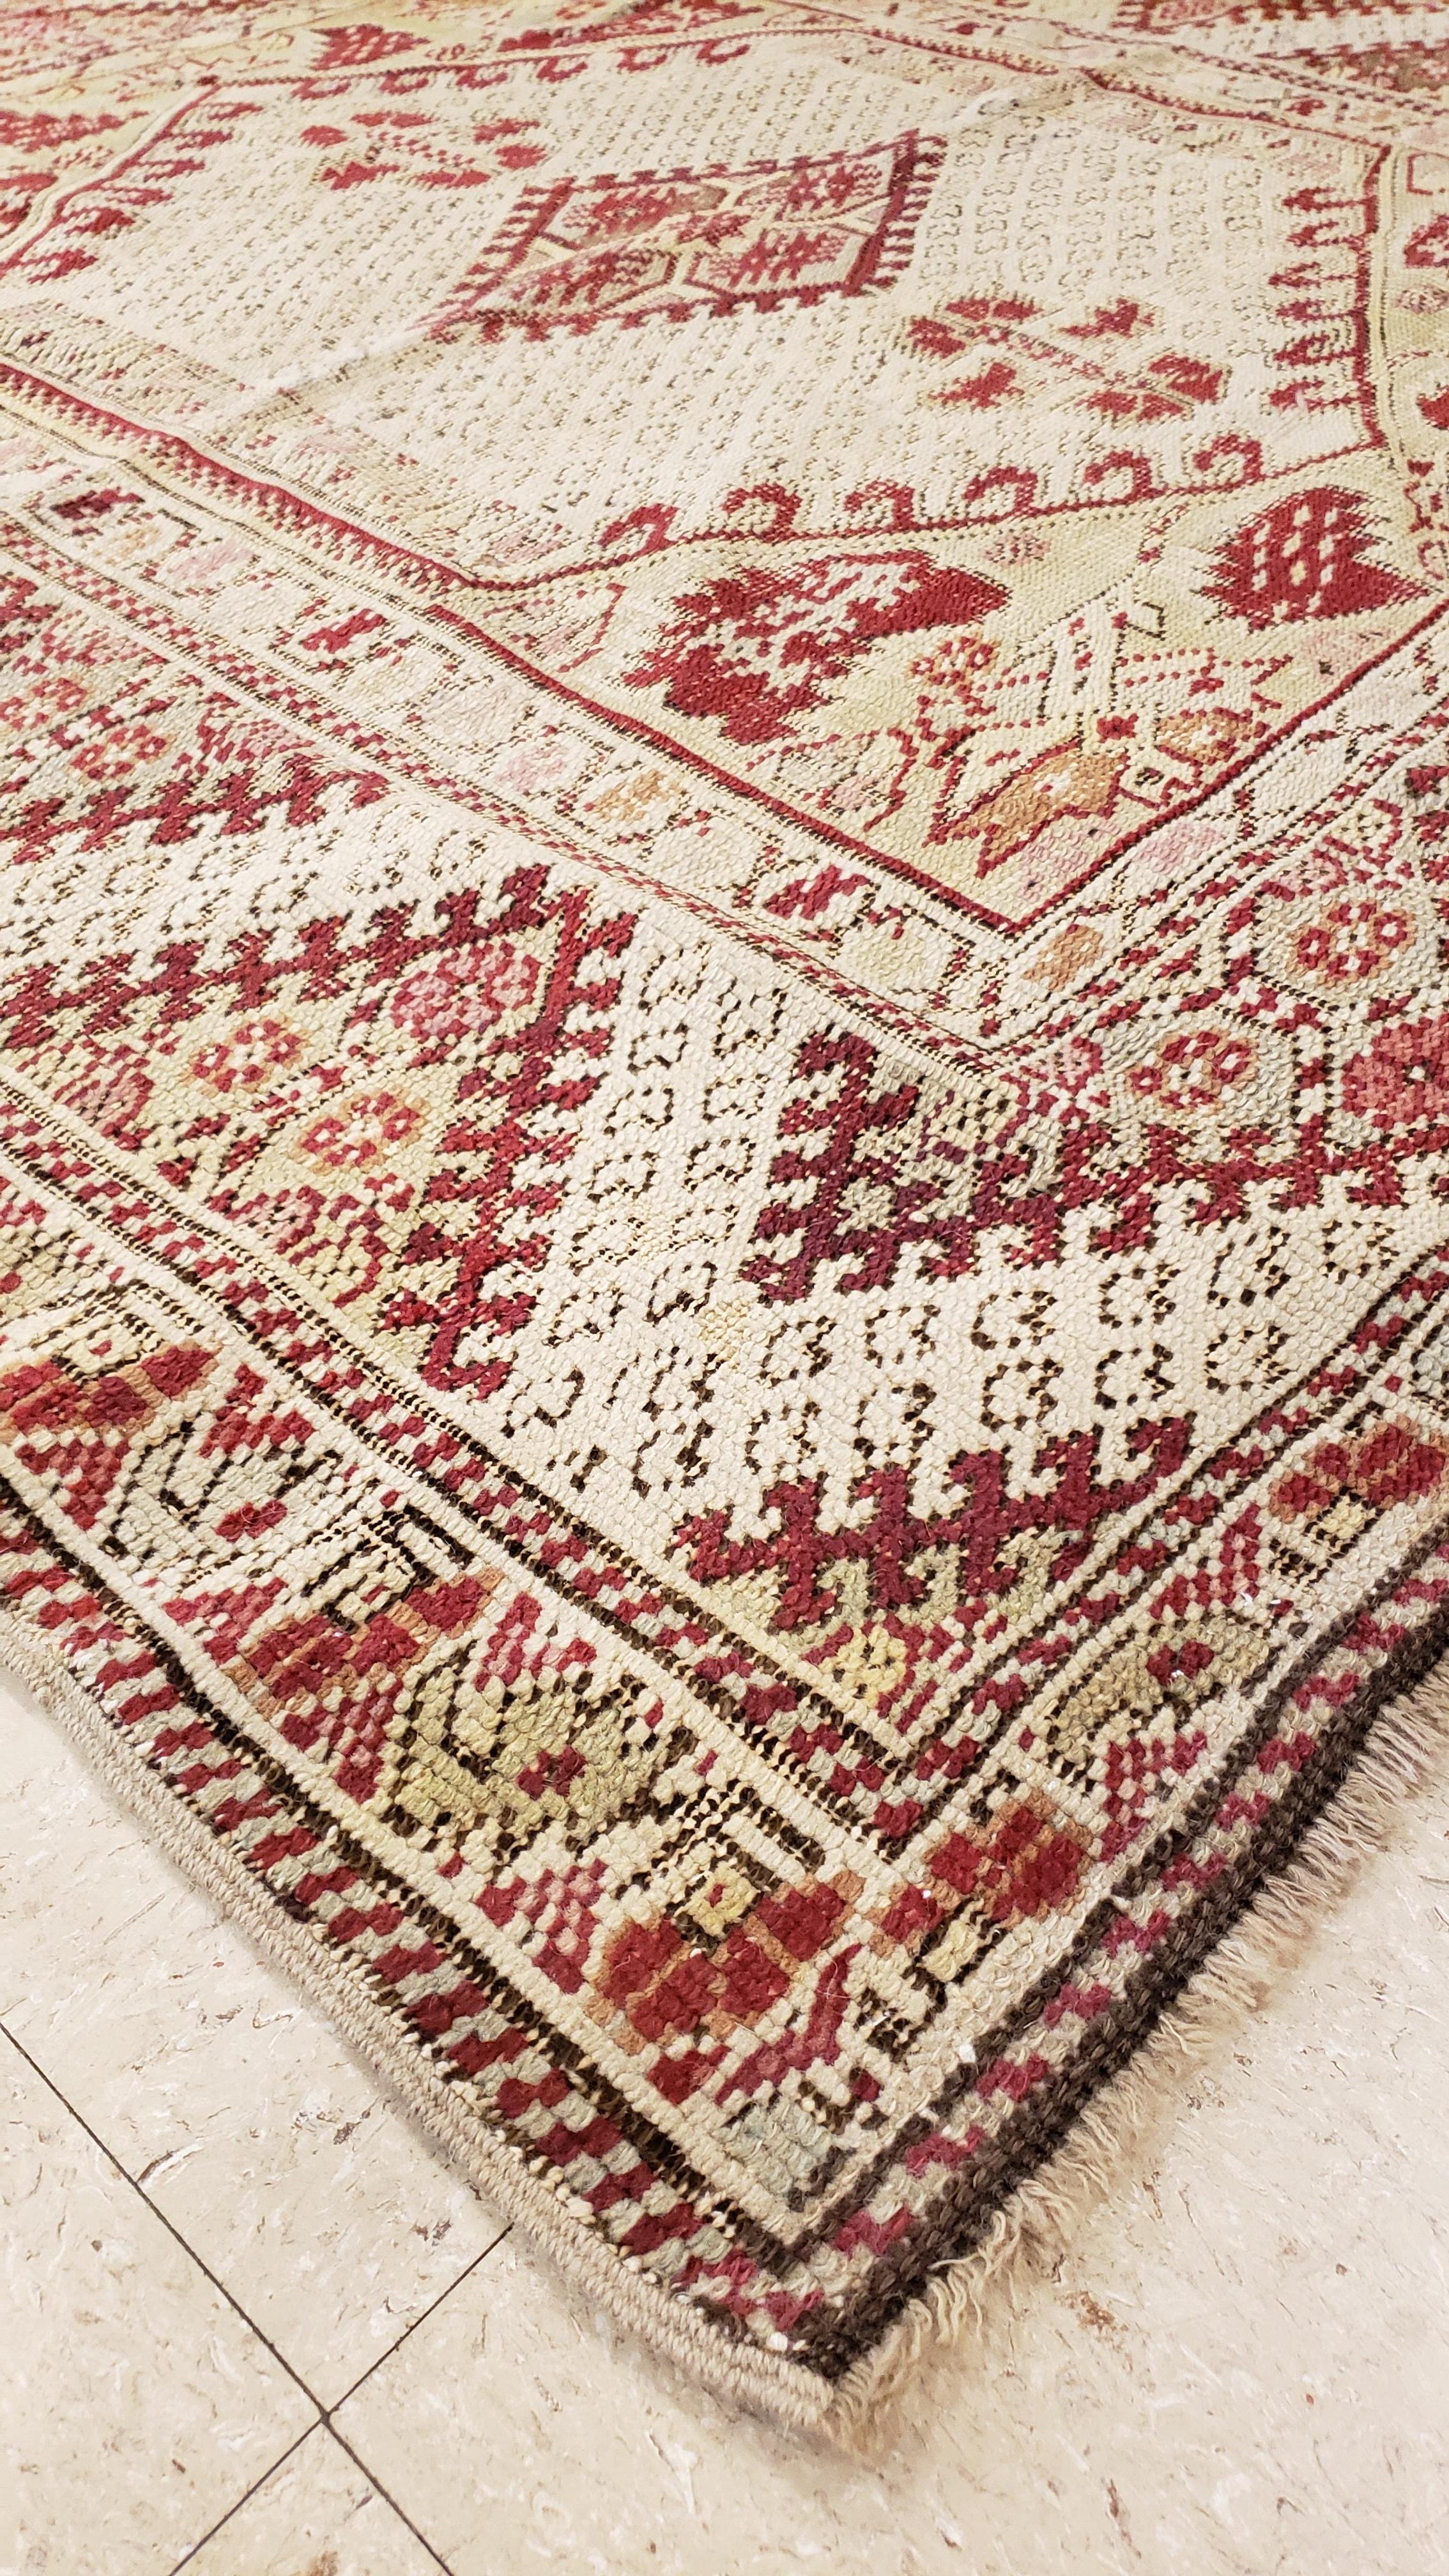 West Anatolia is one of the largest weaving regions in Turkey. Since the 15th century, Turkish rugs have always been on top of the list for having fine oriental rugs.
Oushak/Ghiordes rugs such as this, are desirable in today’s highly decorative